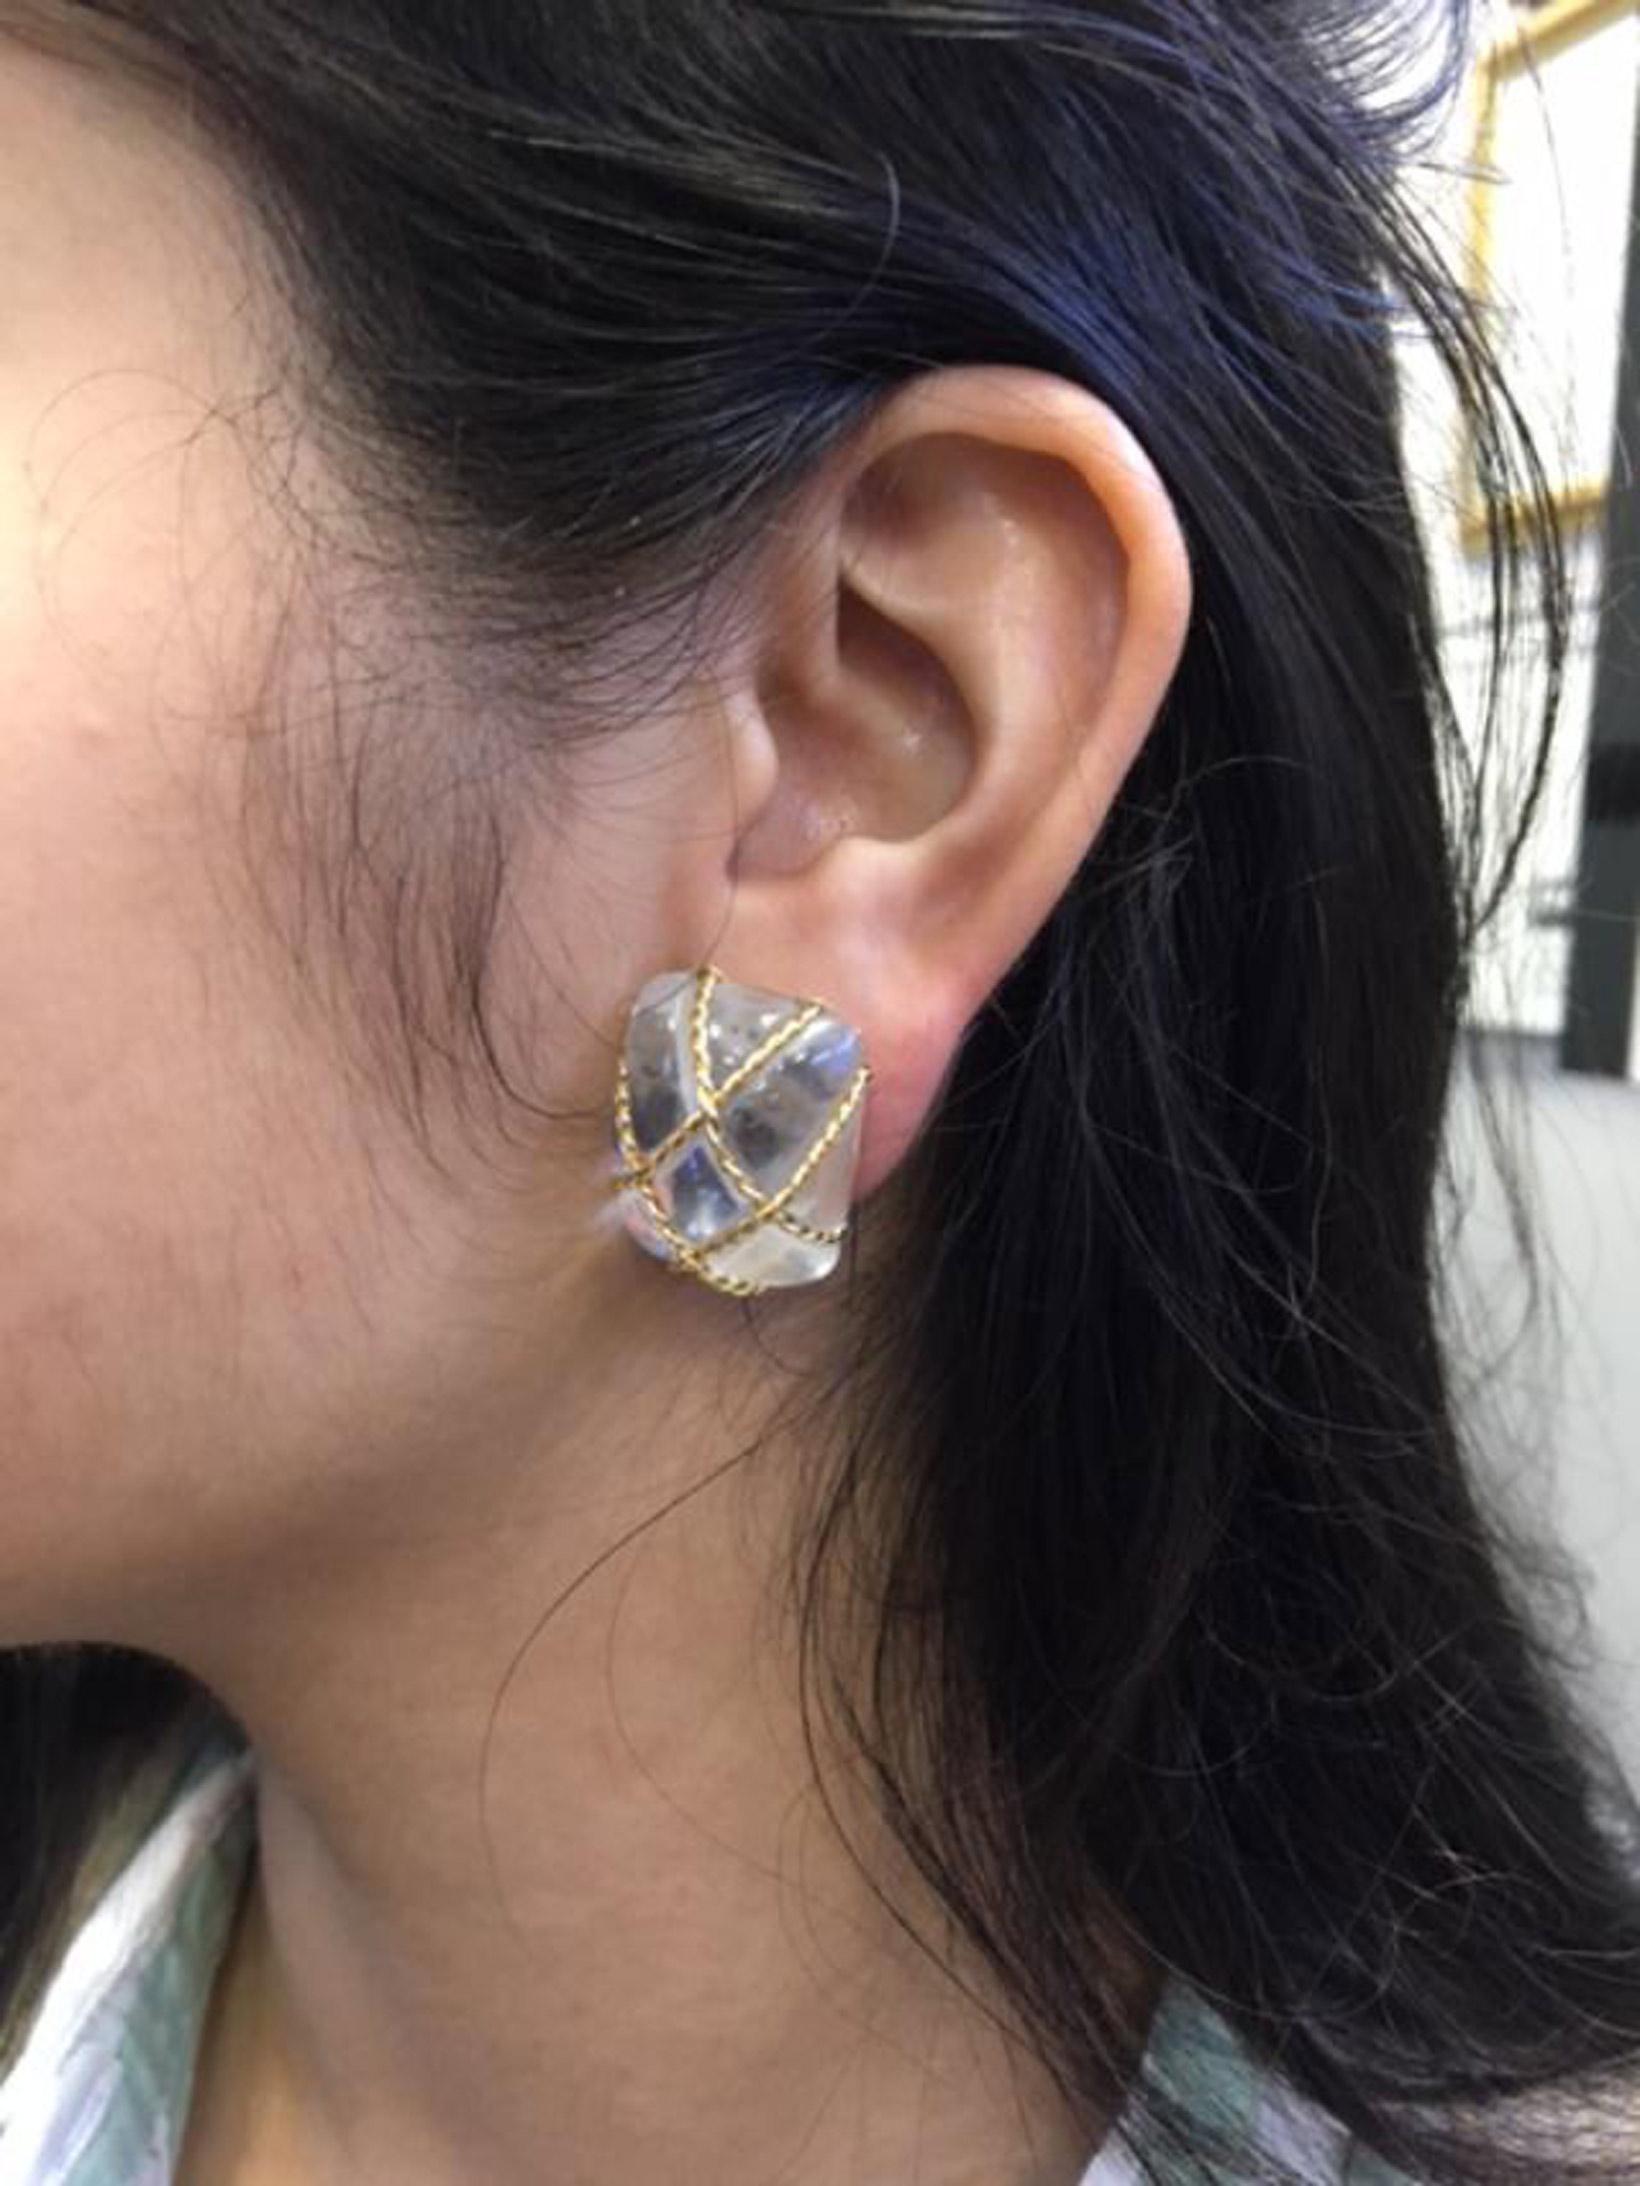 These chic elegant ear clips designed and manufactured by the renown 20th Century jeweler Seaman Schepps are a must-have for every day wear. Polished crystal with bands of braided 18 karat yellow gold give these earrings the perfect match to any